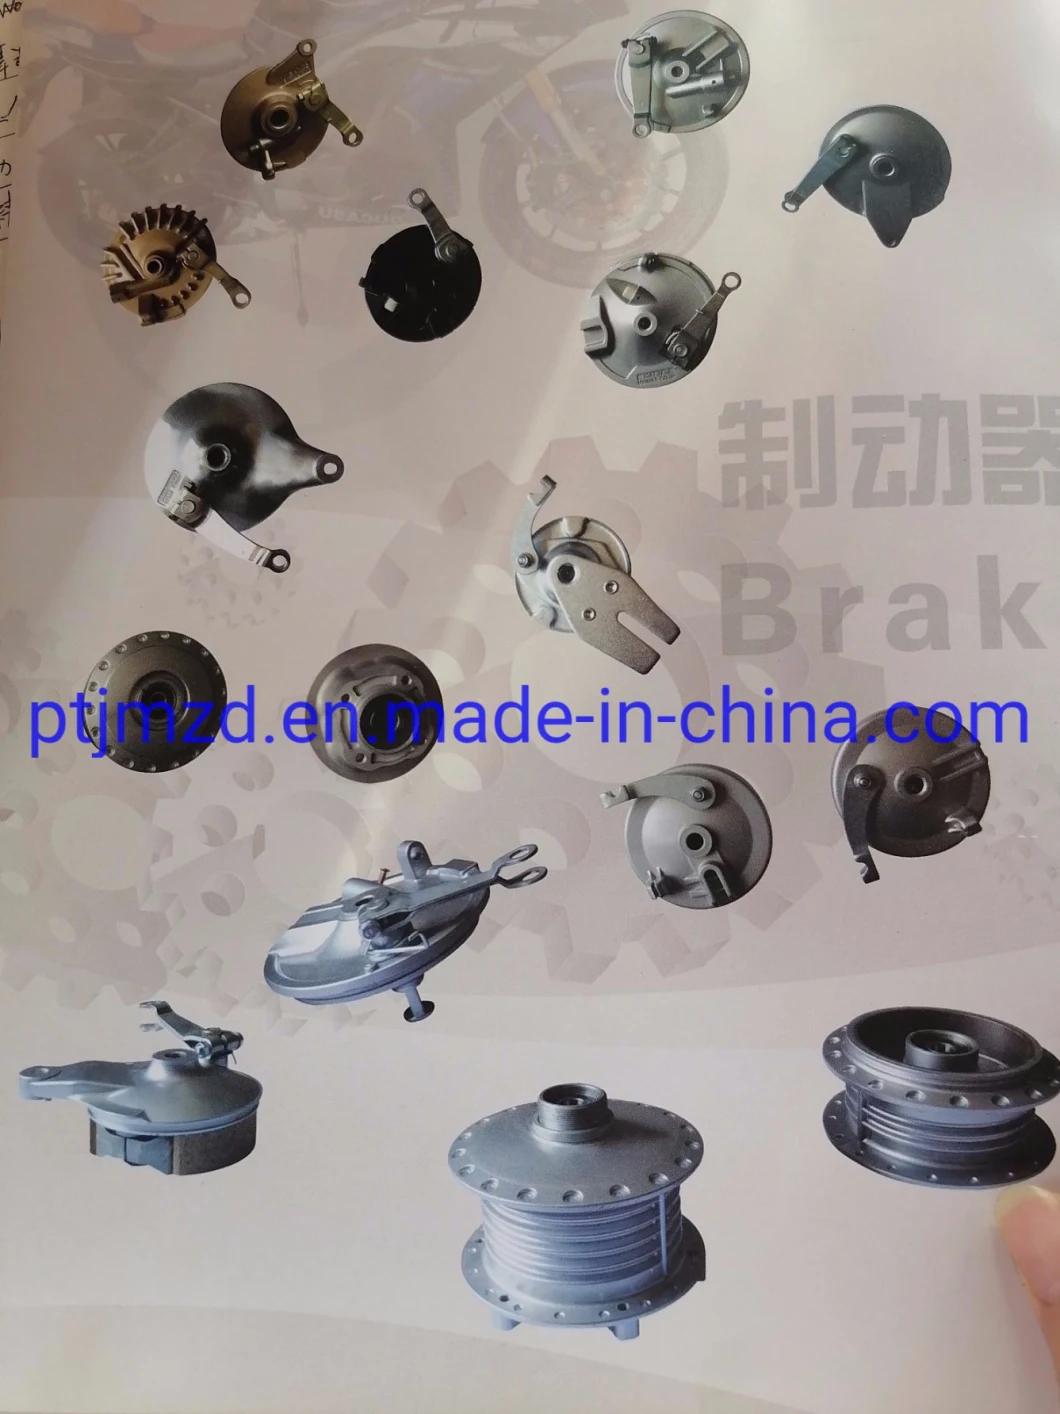 Motorcycle Brake Shoes, Automobile Parts, Motorcycle Parts-Cn125